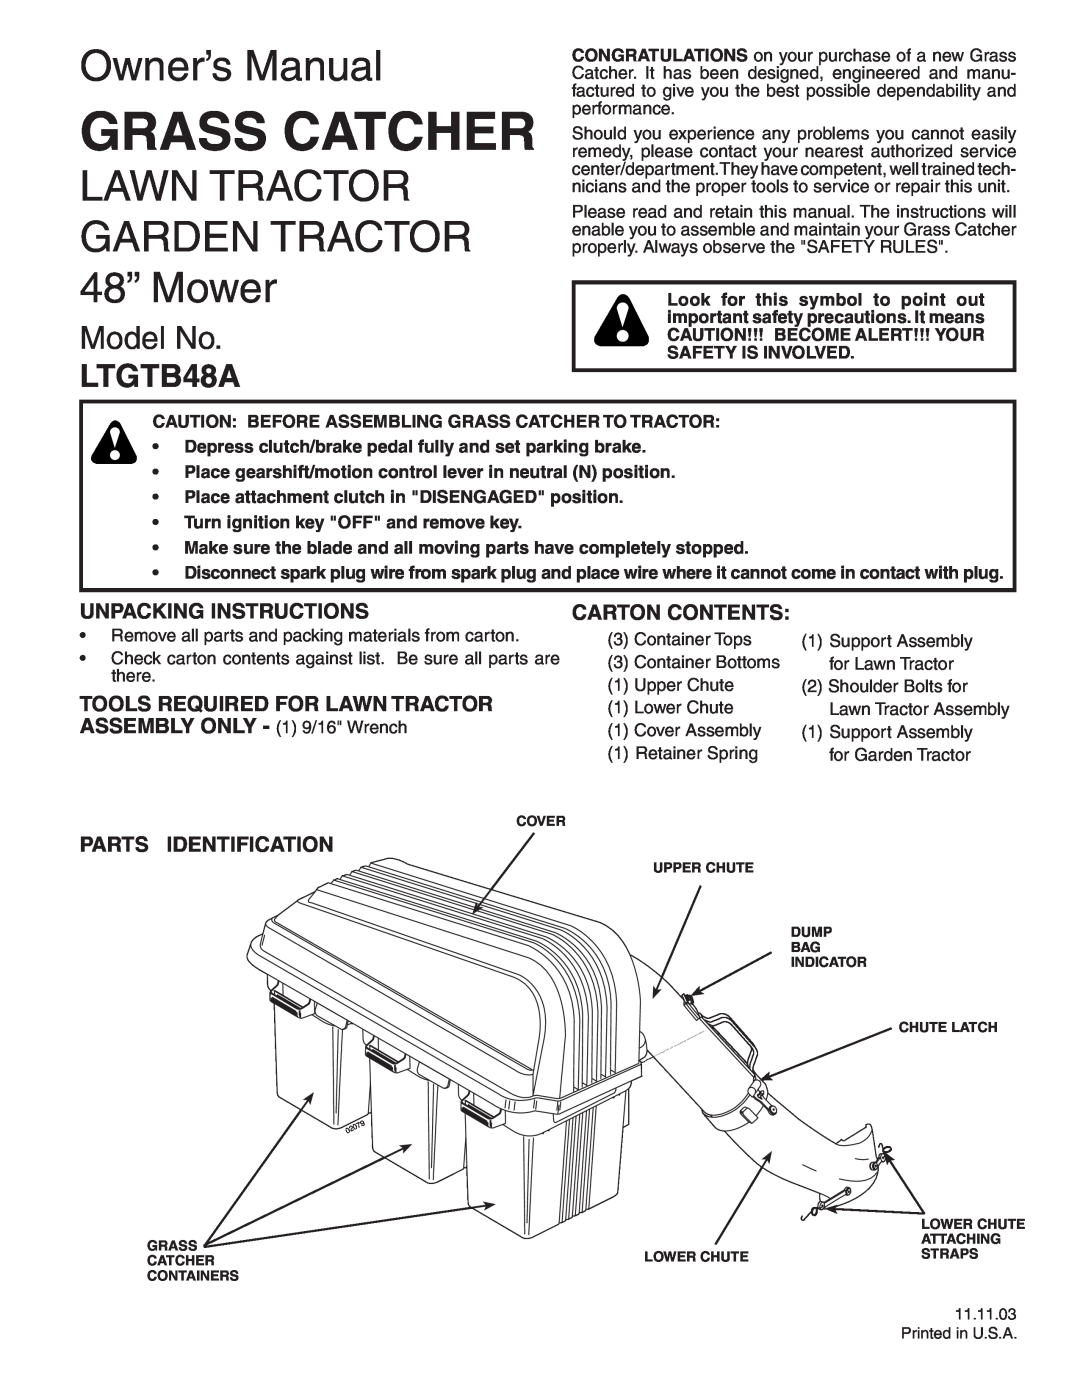 Poulan LTGTB48A owner manual Unpacking Instructions, Tools Required For Lawn Tractor, ASSEMBLY ONLY - 1 9/16 Wrench 